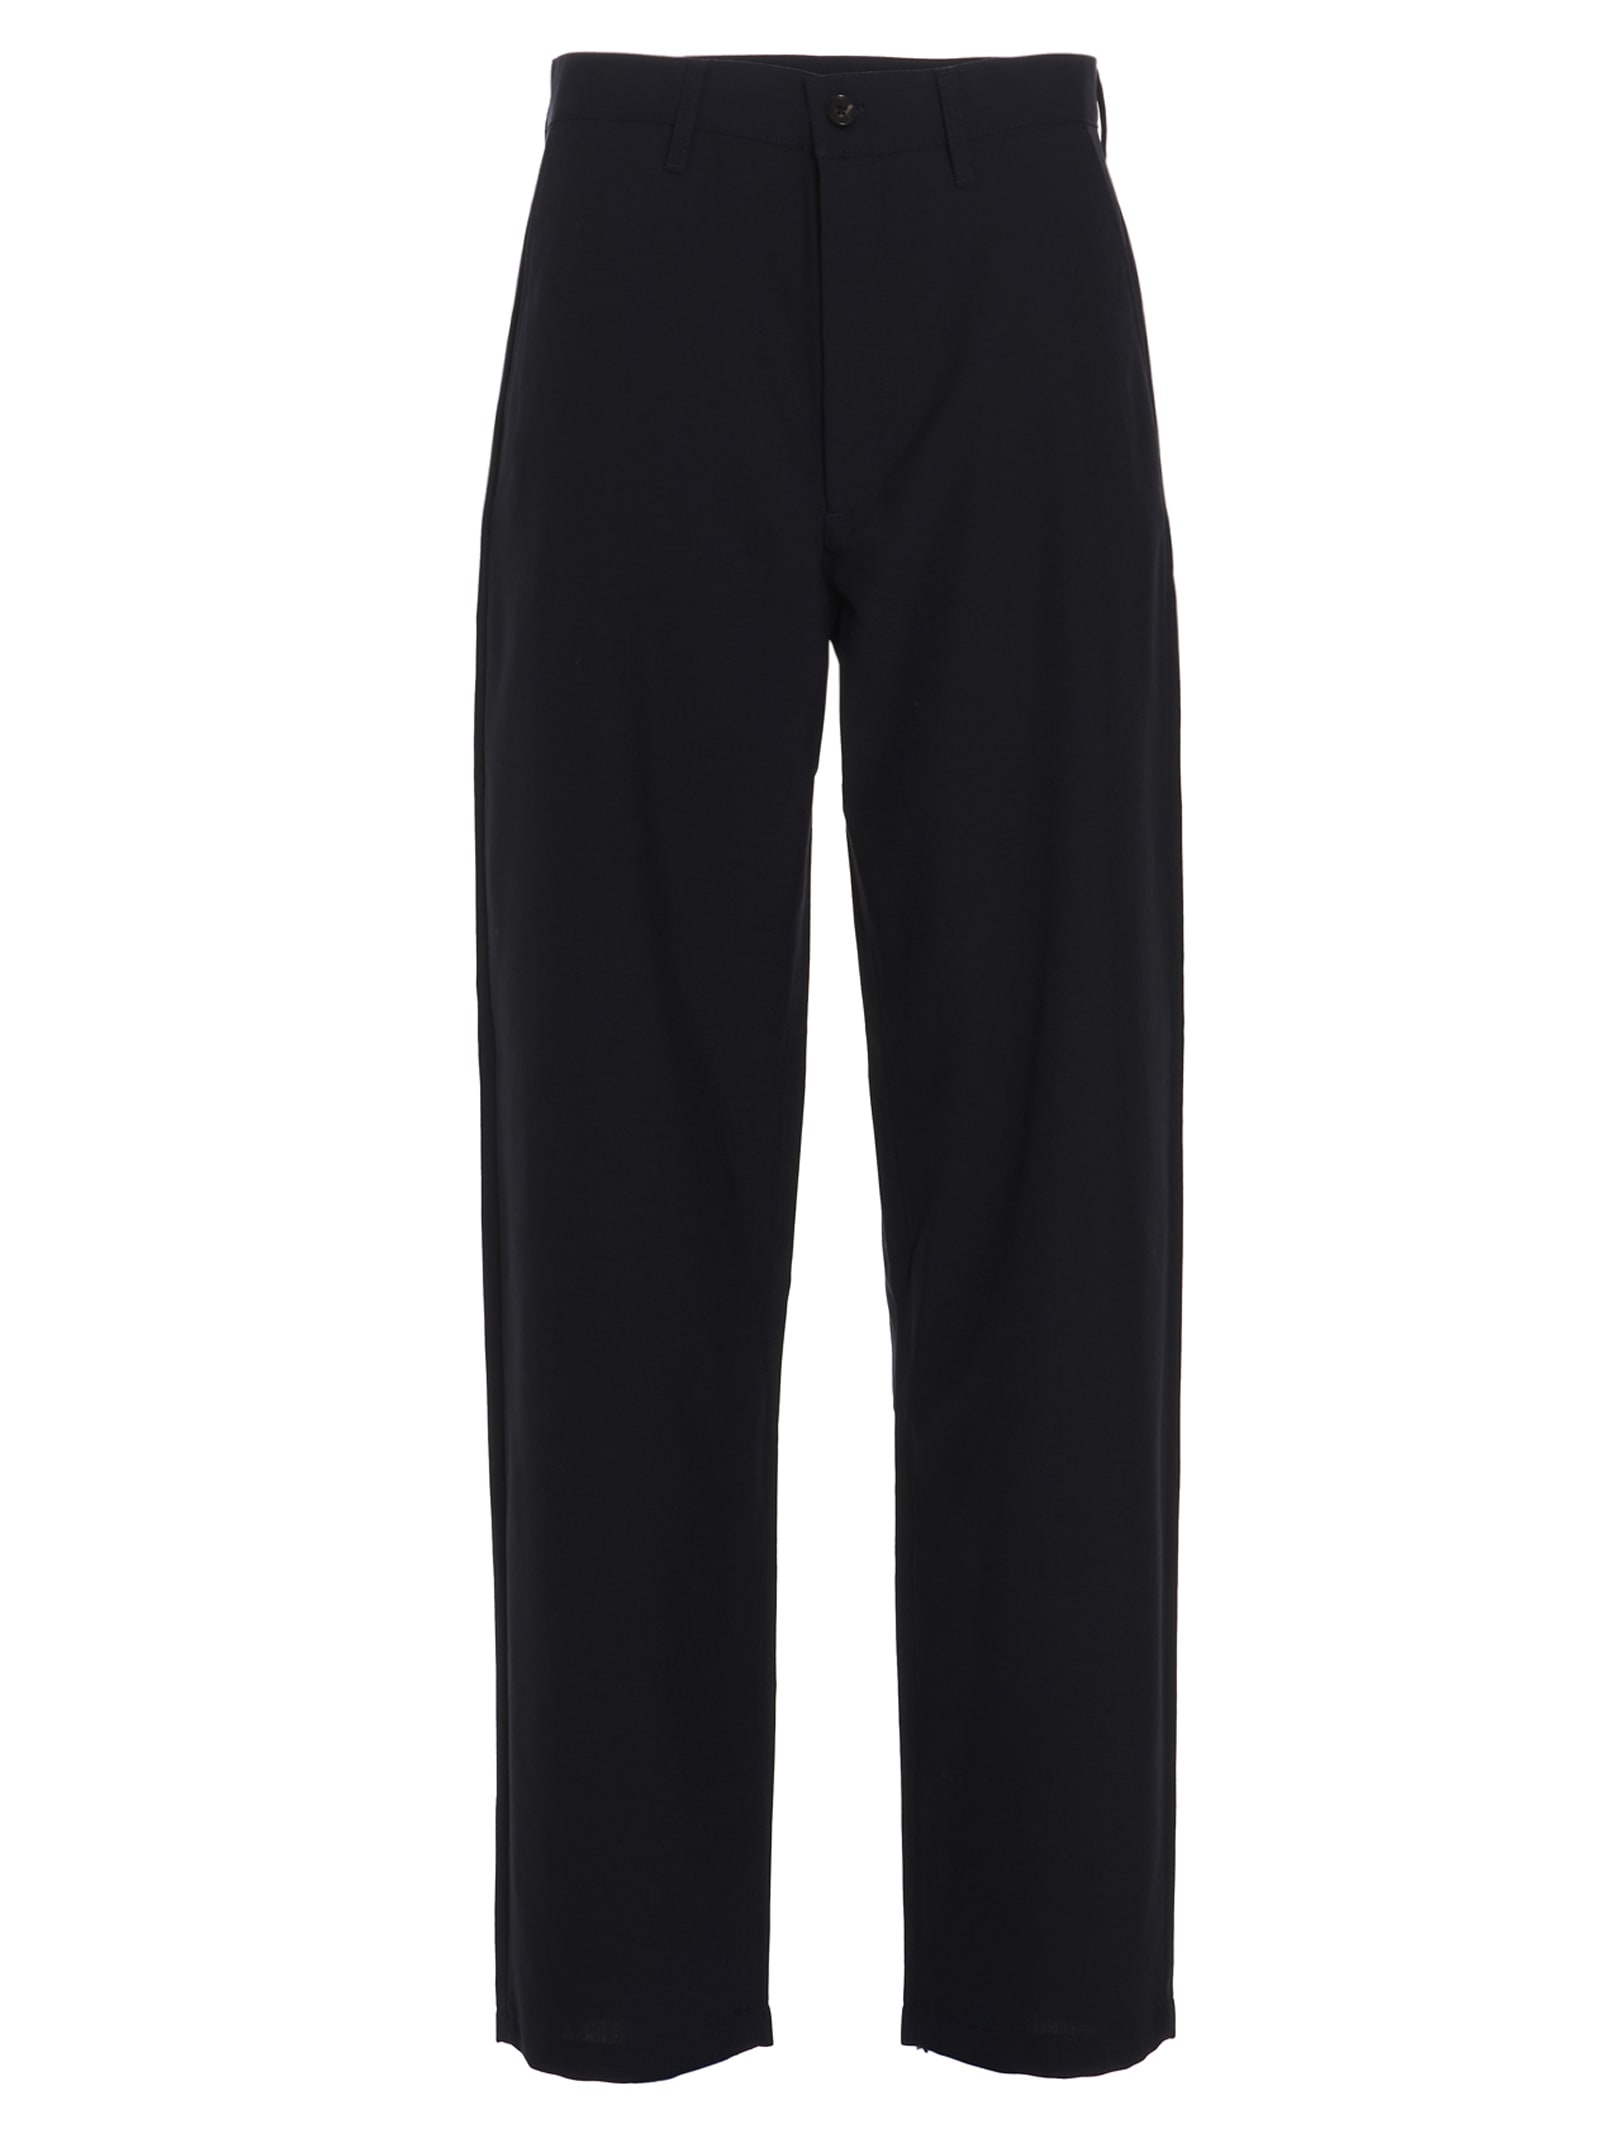 Sunflower soft Trousers